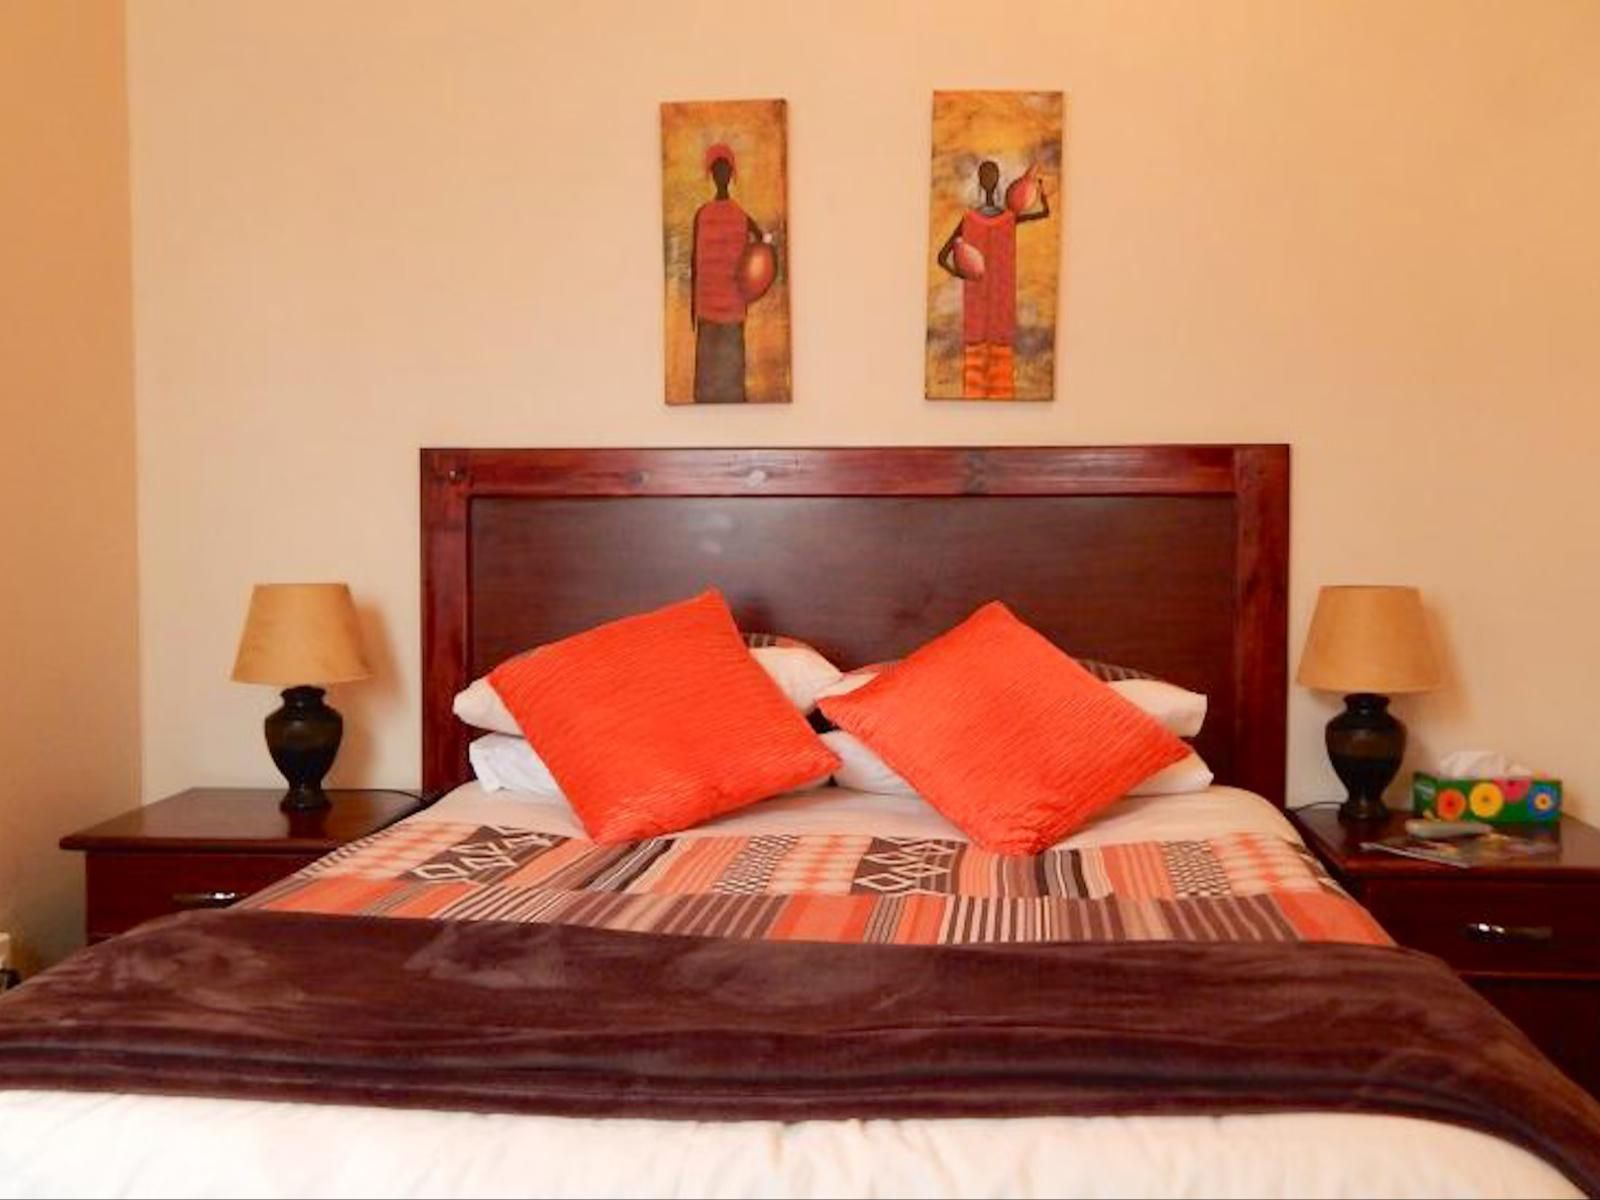 Oak Rest Bed And Breakfast Belgravia Kimberley Northern Cape South Africa Colorful, Bedroom